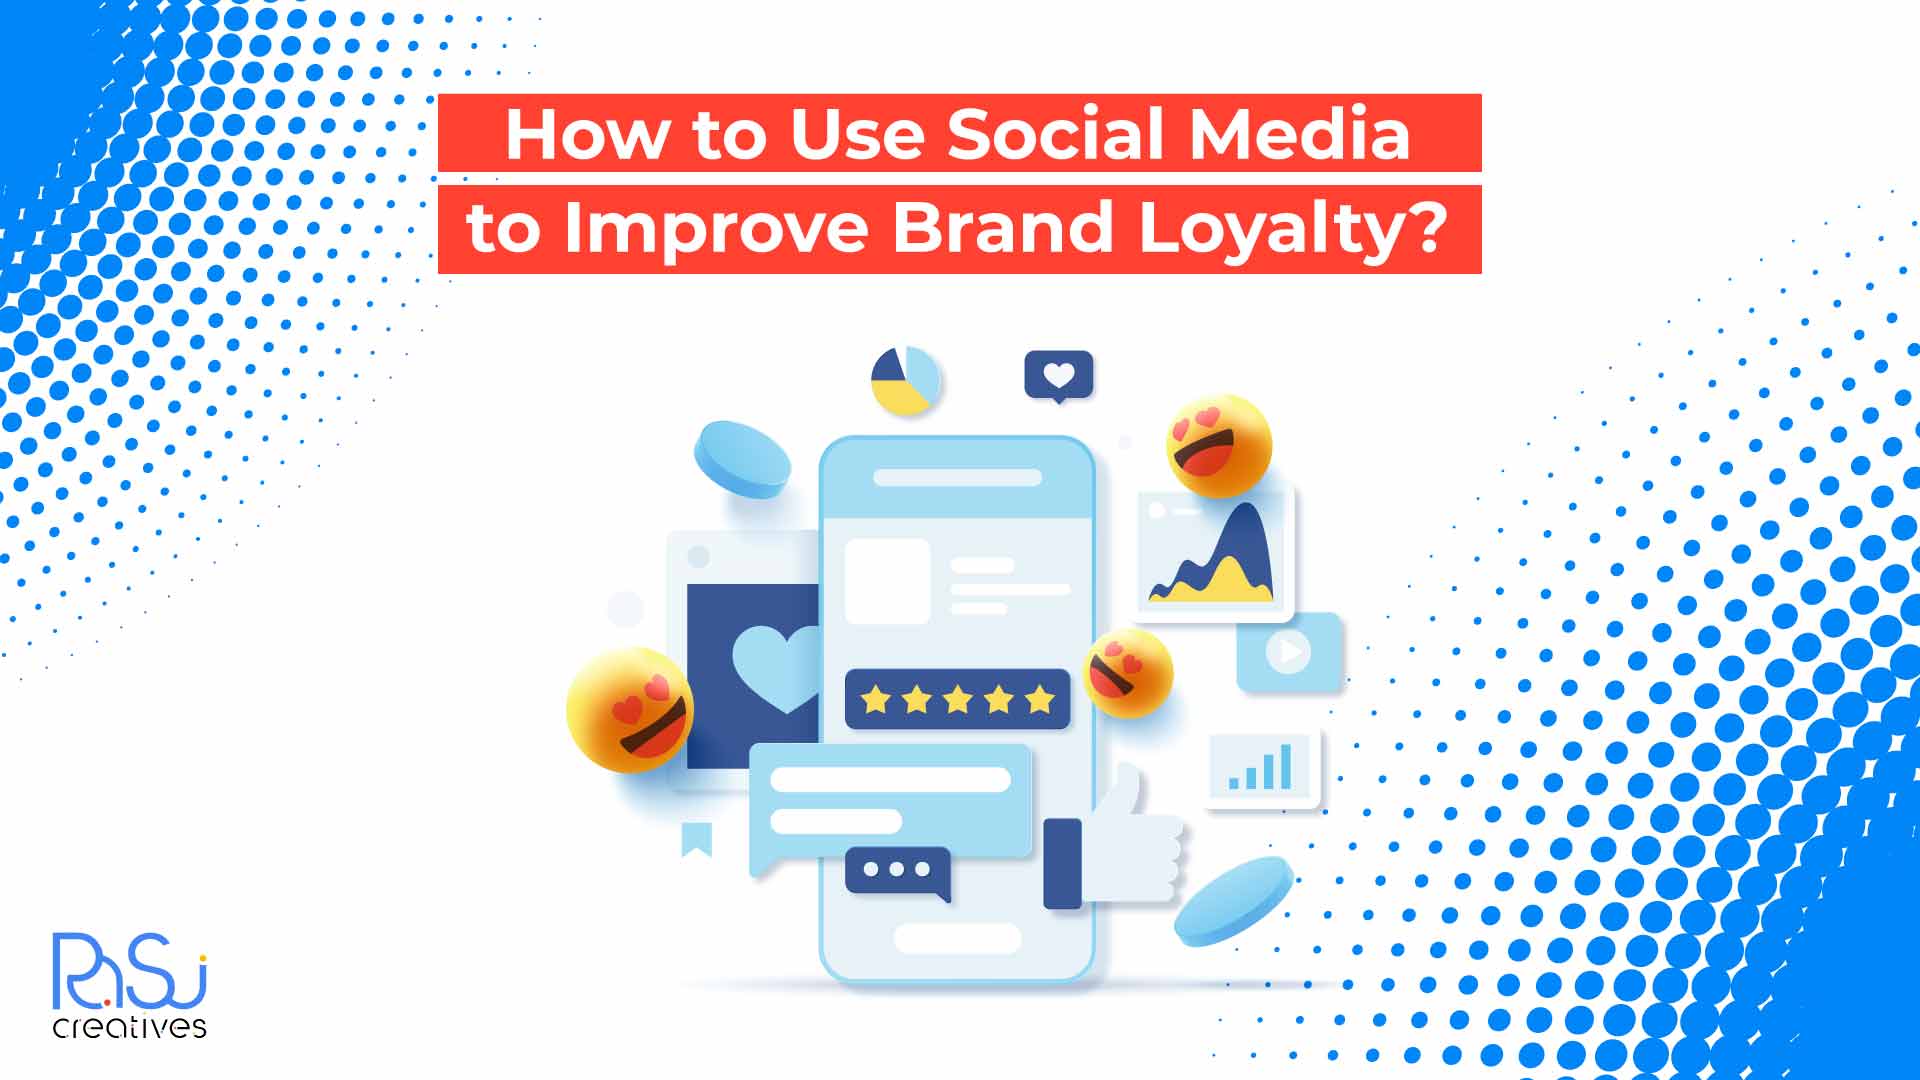 How to Use Social Media to Improve Brand Loyalty?